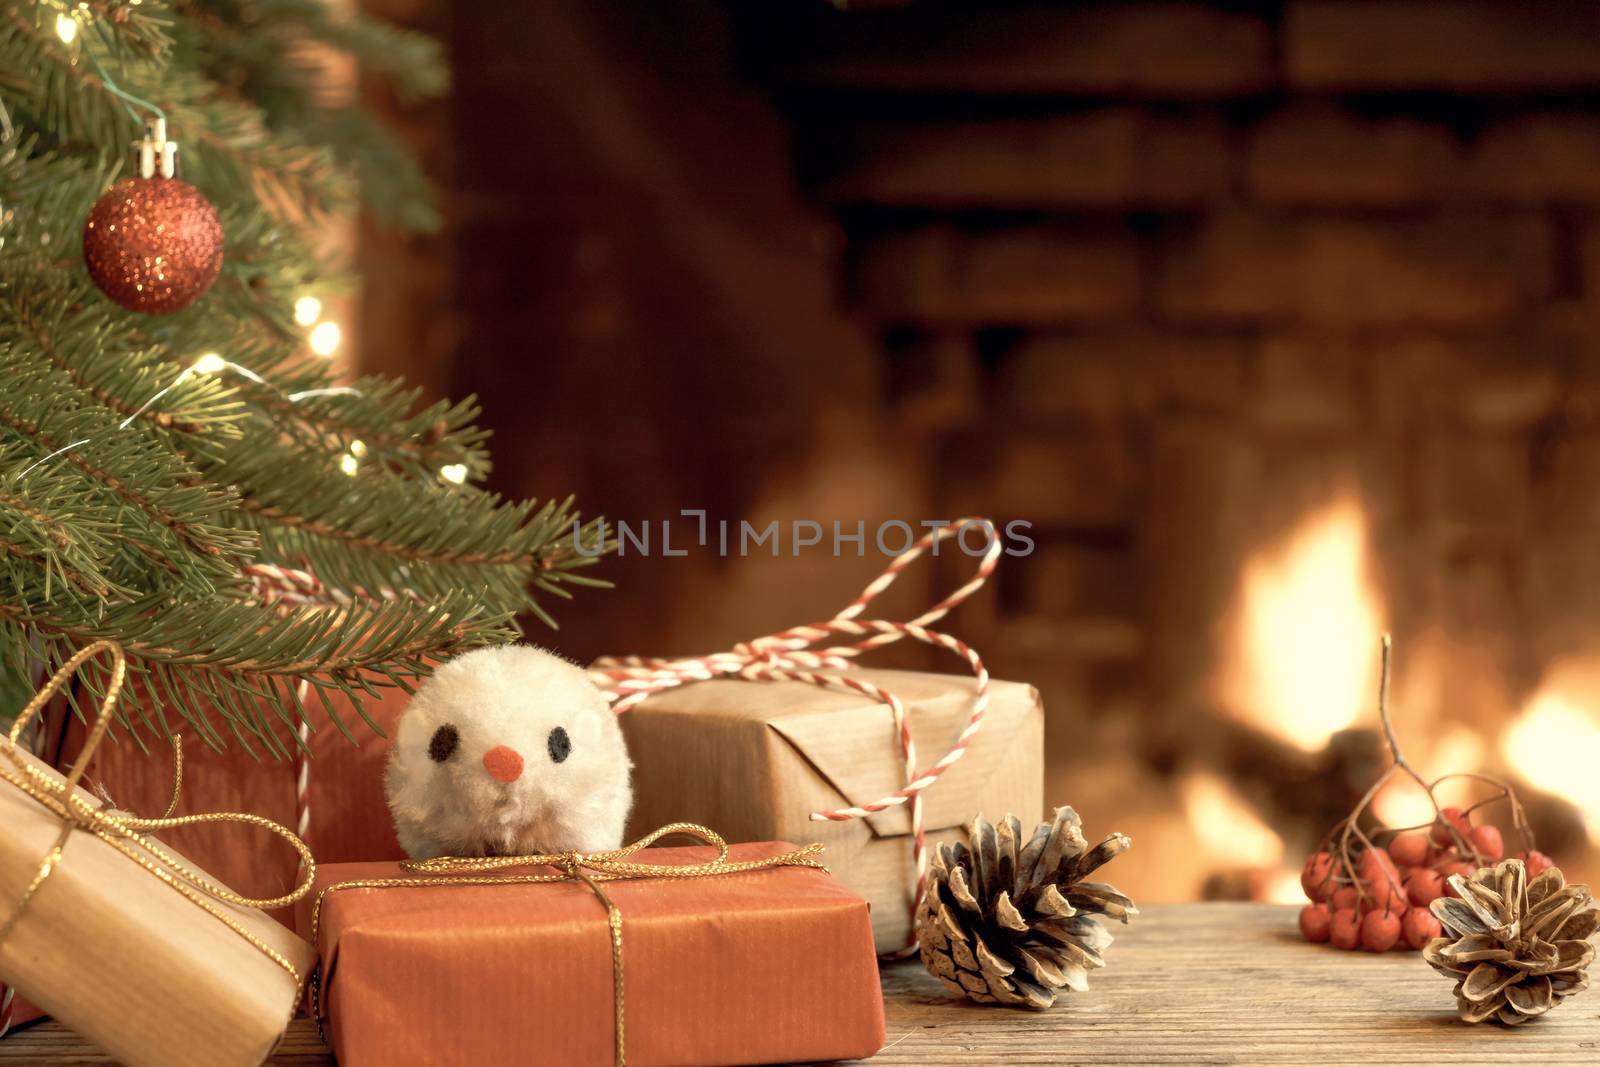 Christmas composition - mouse is symbol of 2020 according to Chinese horoscope next to gifts under Christmas tree in room by fireplace.